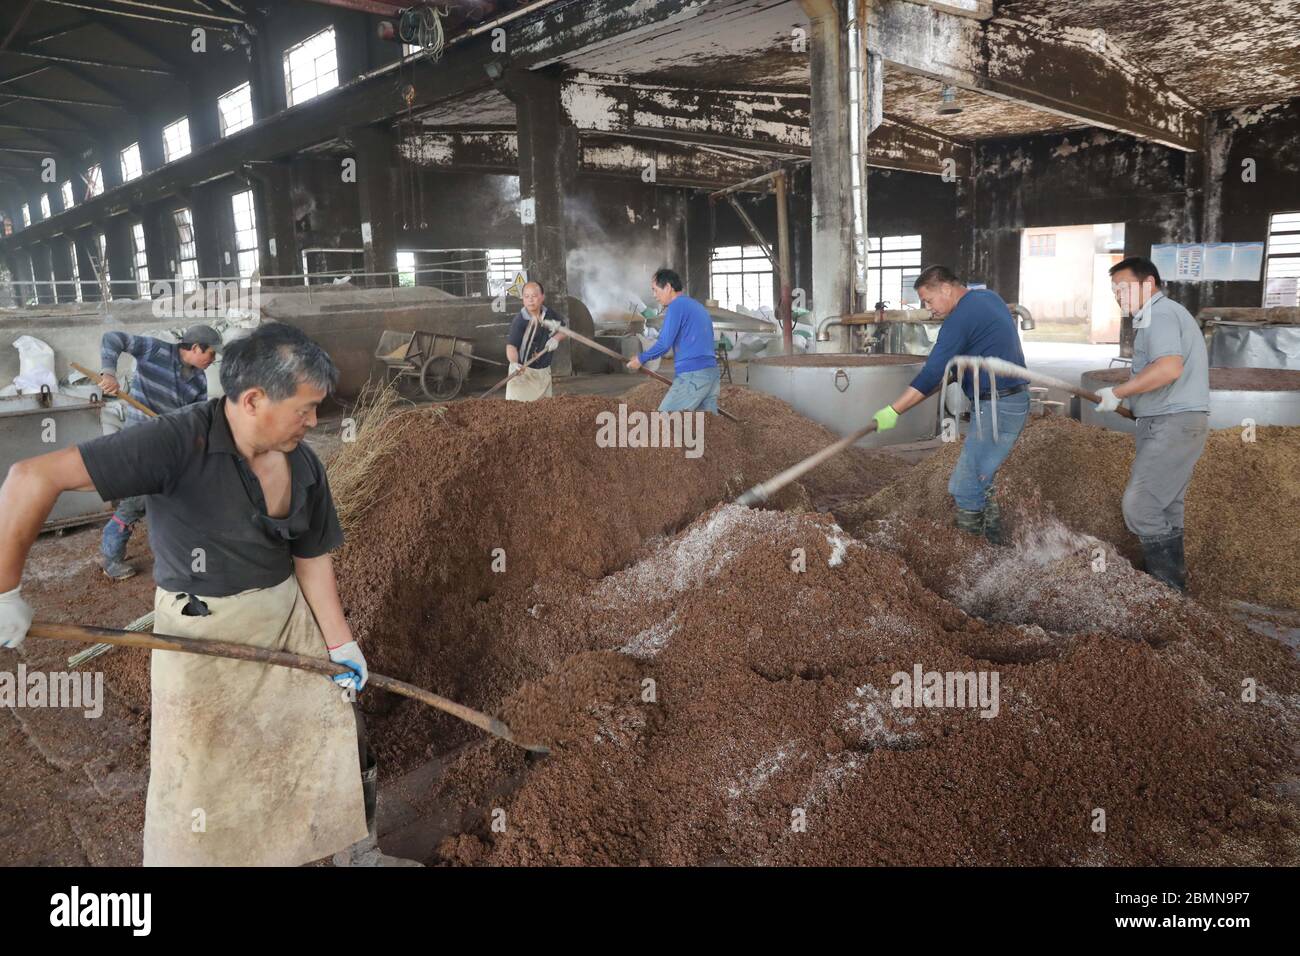 Haimen, Haimen, China. 10th May, 2020. JInagsuÃ¯Â¼Å'CHINA-On May 7, 2020, in the yisheng century-old cellar pool and brewing workshop located in changle town, haimen, jiangsu province, the brewing workers followed the traditional craft brewing process, mixing fermented grains with distillers' grains, hauling distillers' grains, steaming liquor on the steamer, and brewing the original liquor. Credit: SIPA Asia/ZUMA Wire/Alamy Live News Stock Photo